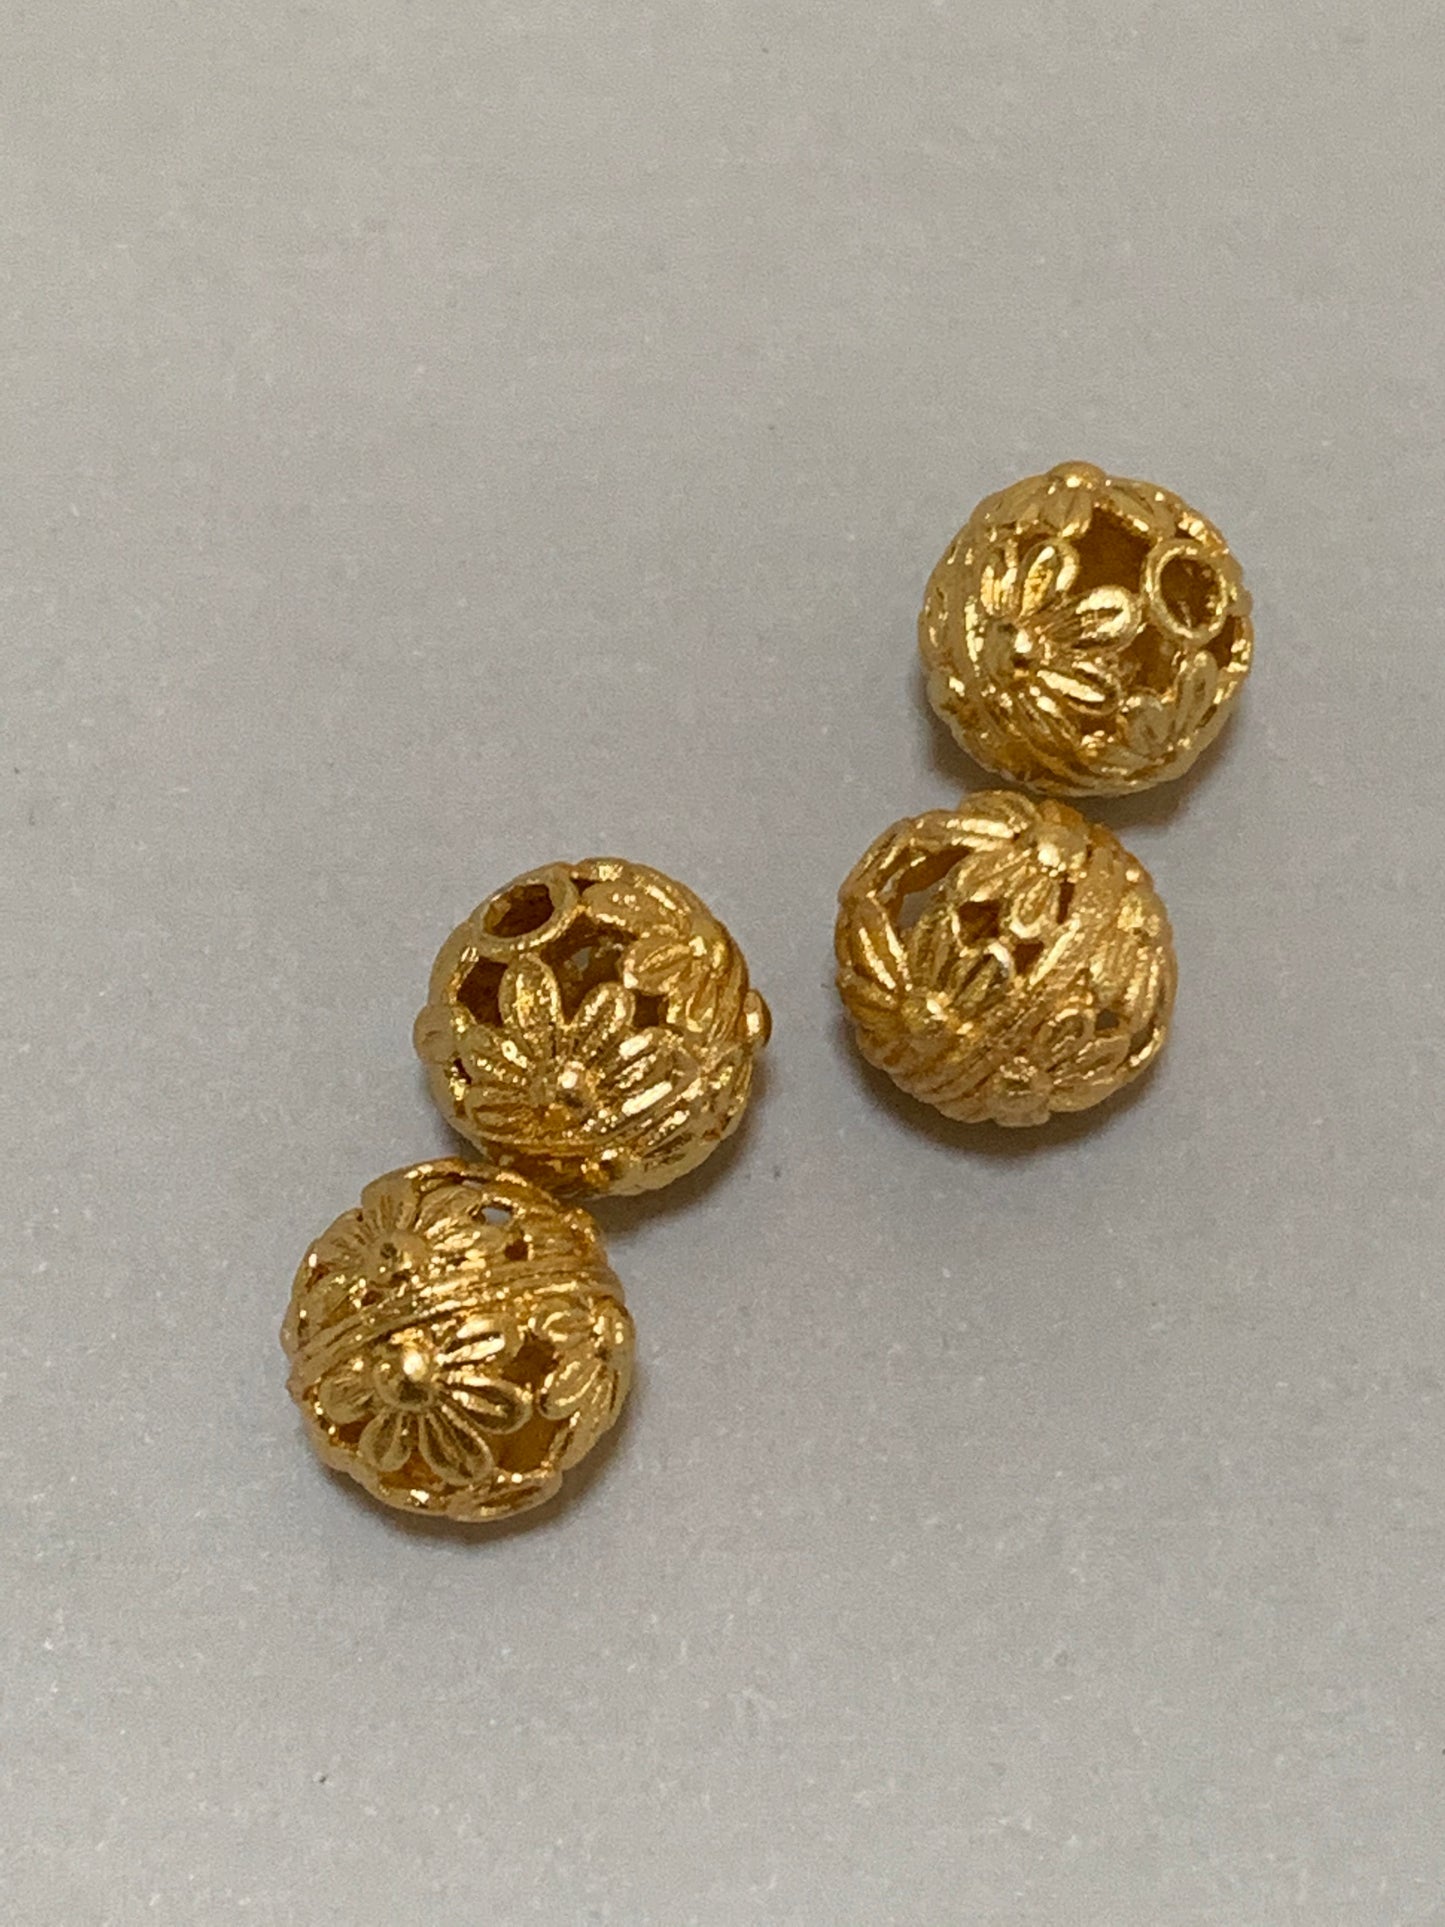 12mm Round with Flower Gold Qty 4 / Separador Redondo